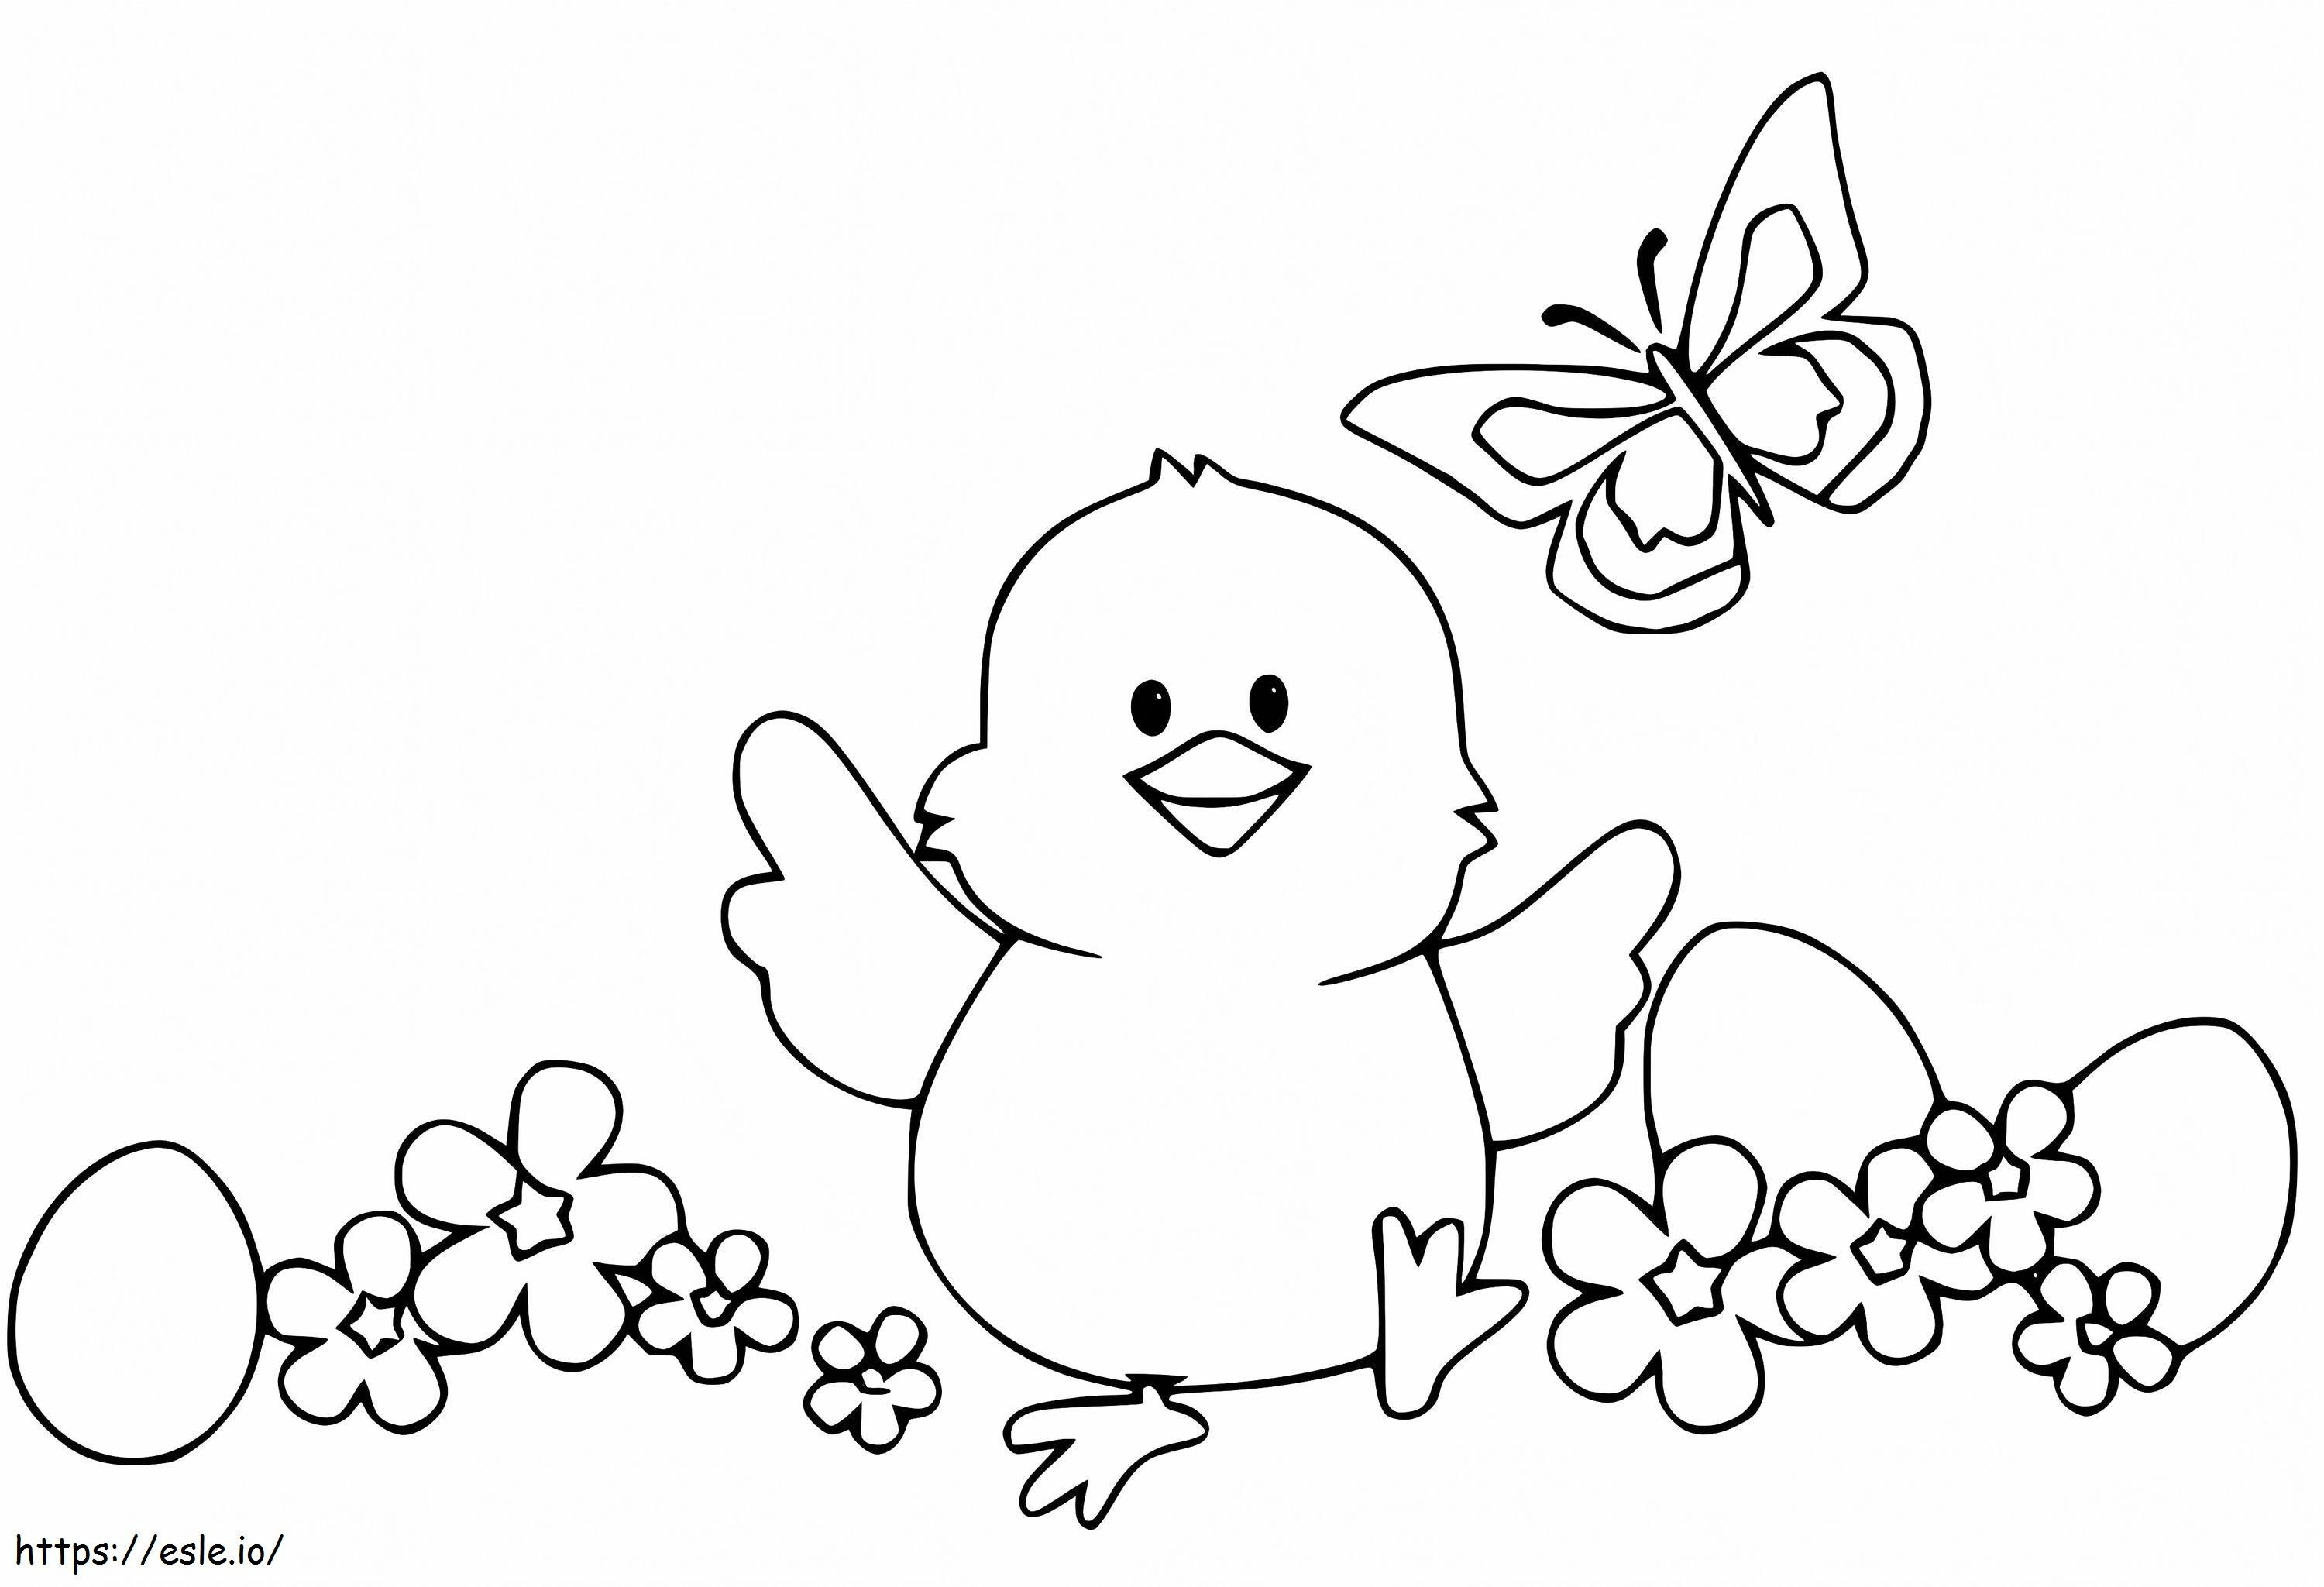 Printable Easter Chick coloring page